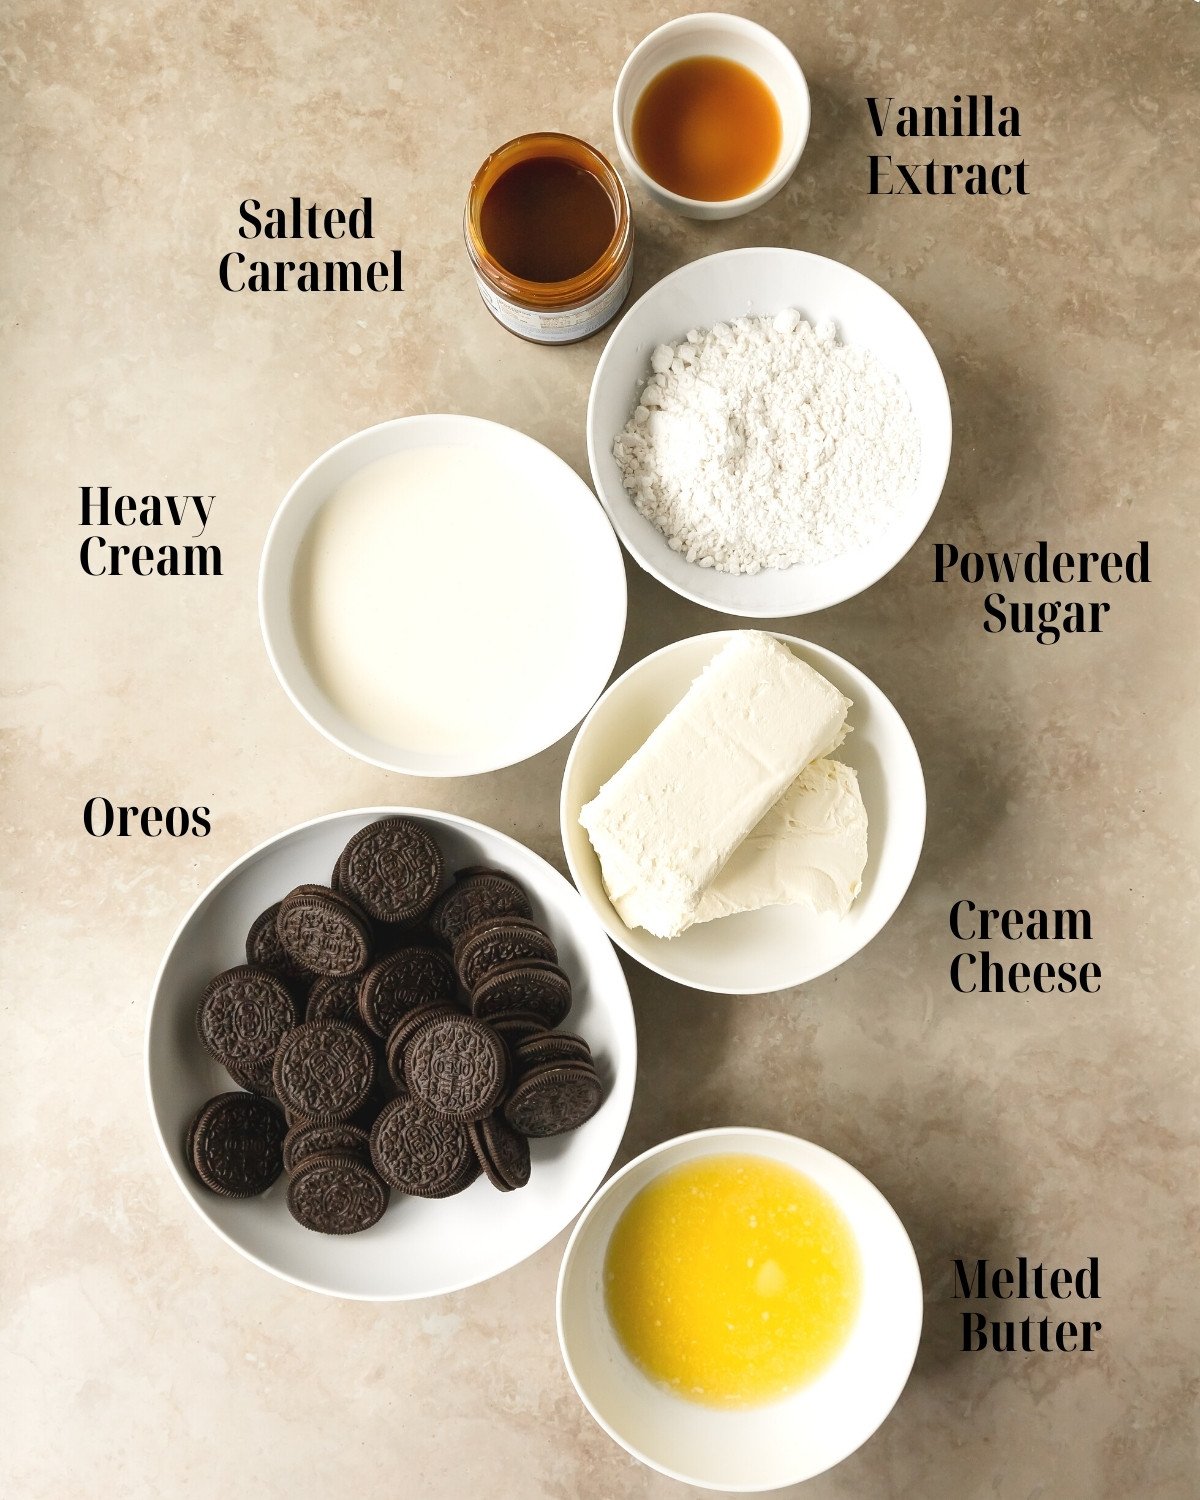 Ingredients:  Gather cream cheese, heavy whipping cream,powdered sugar, salted caramel, vanilla extract salt, chocolate sandwich cookies and melted butter. 